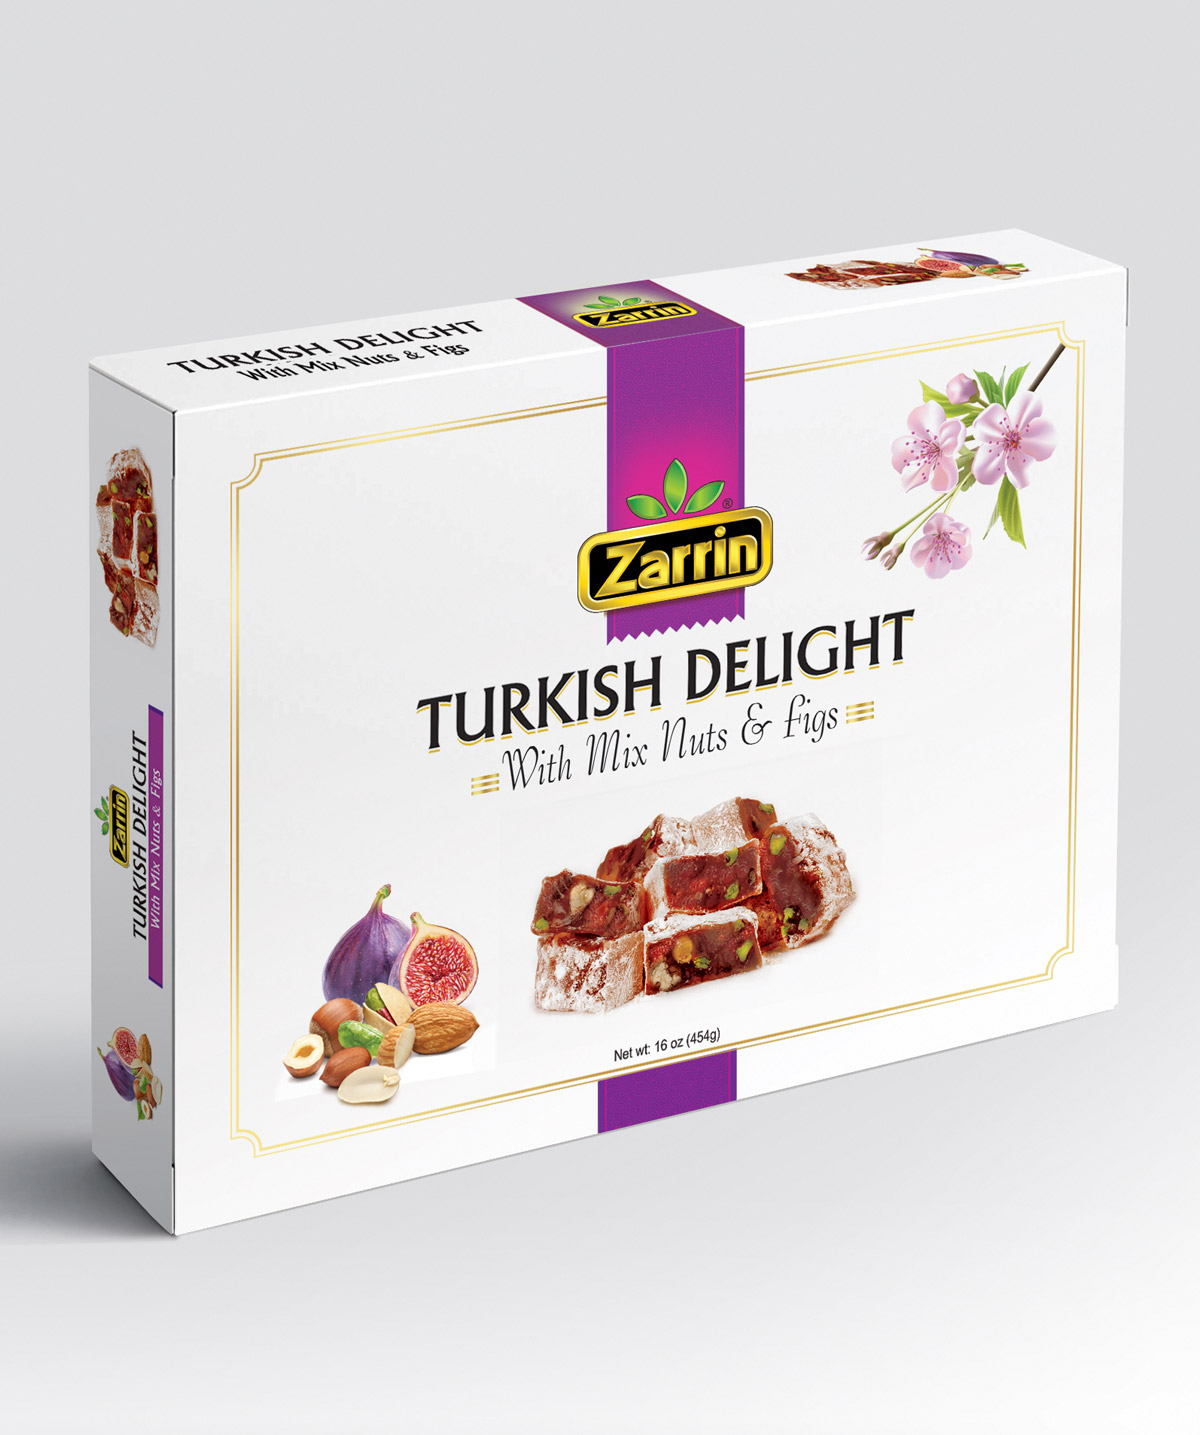 Zarrin Turkish Delight With Mix Nuts & Figs